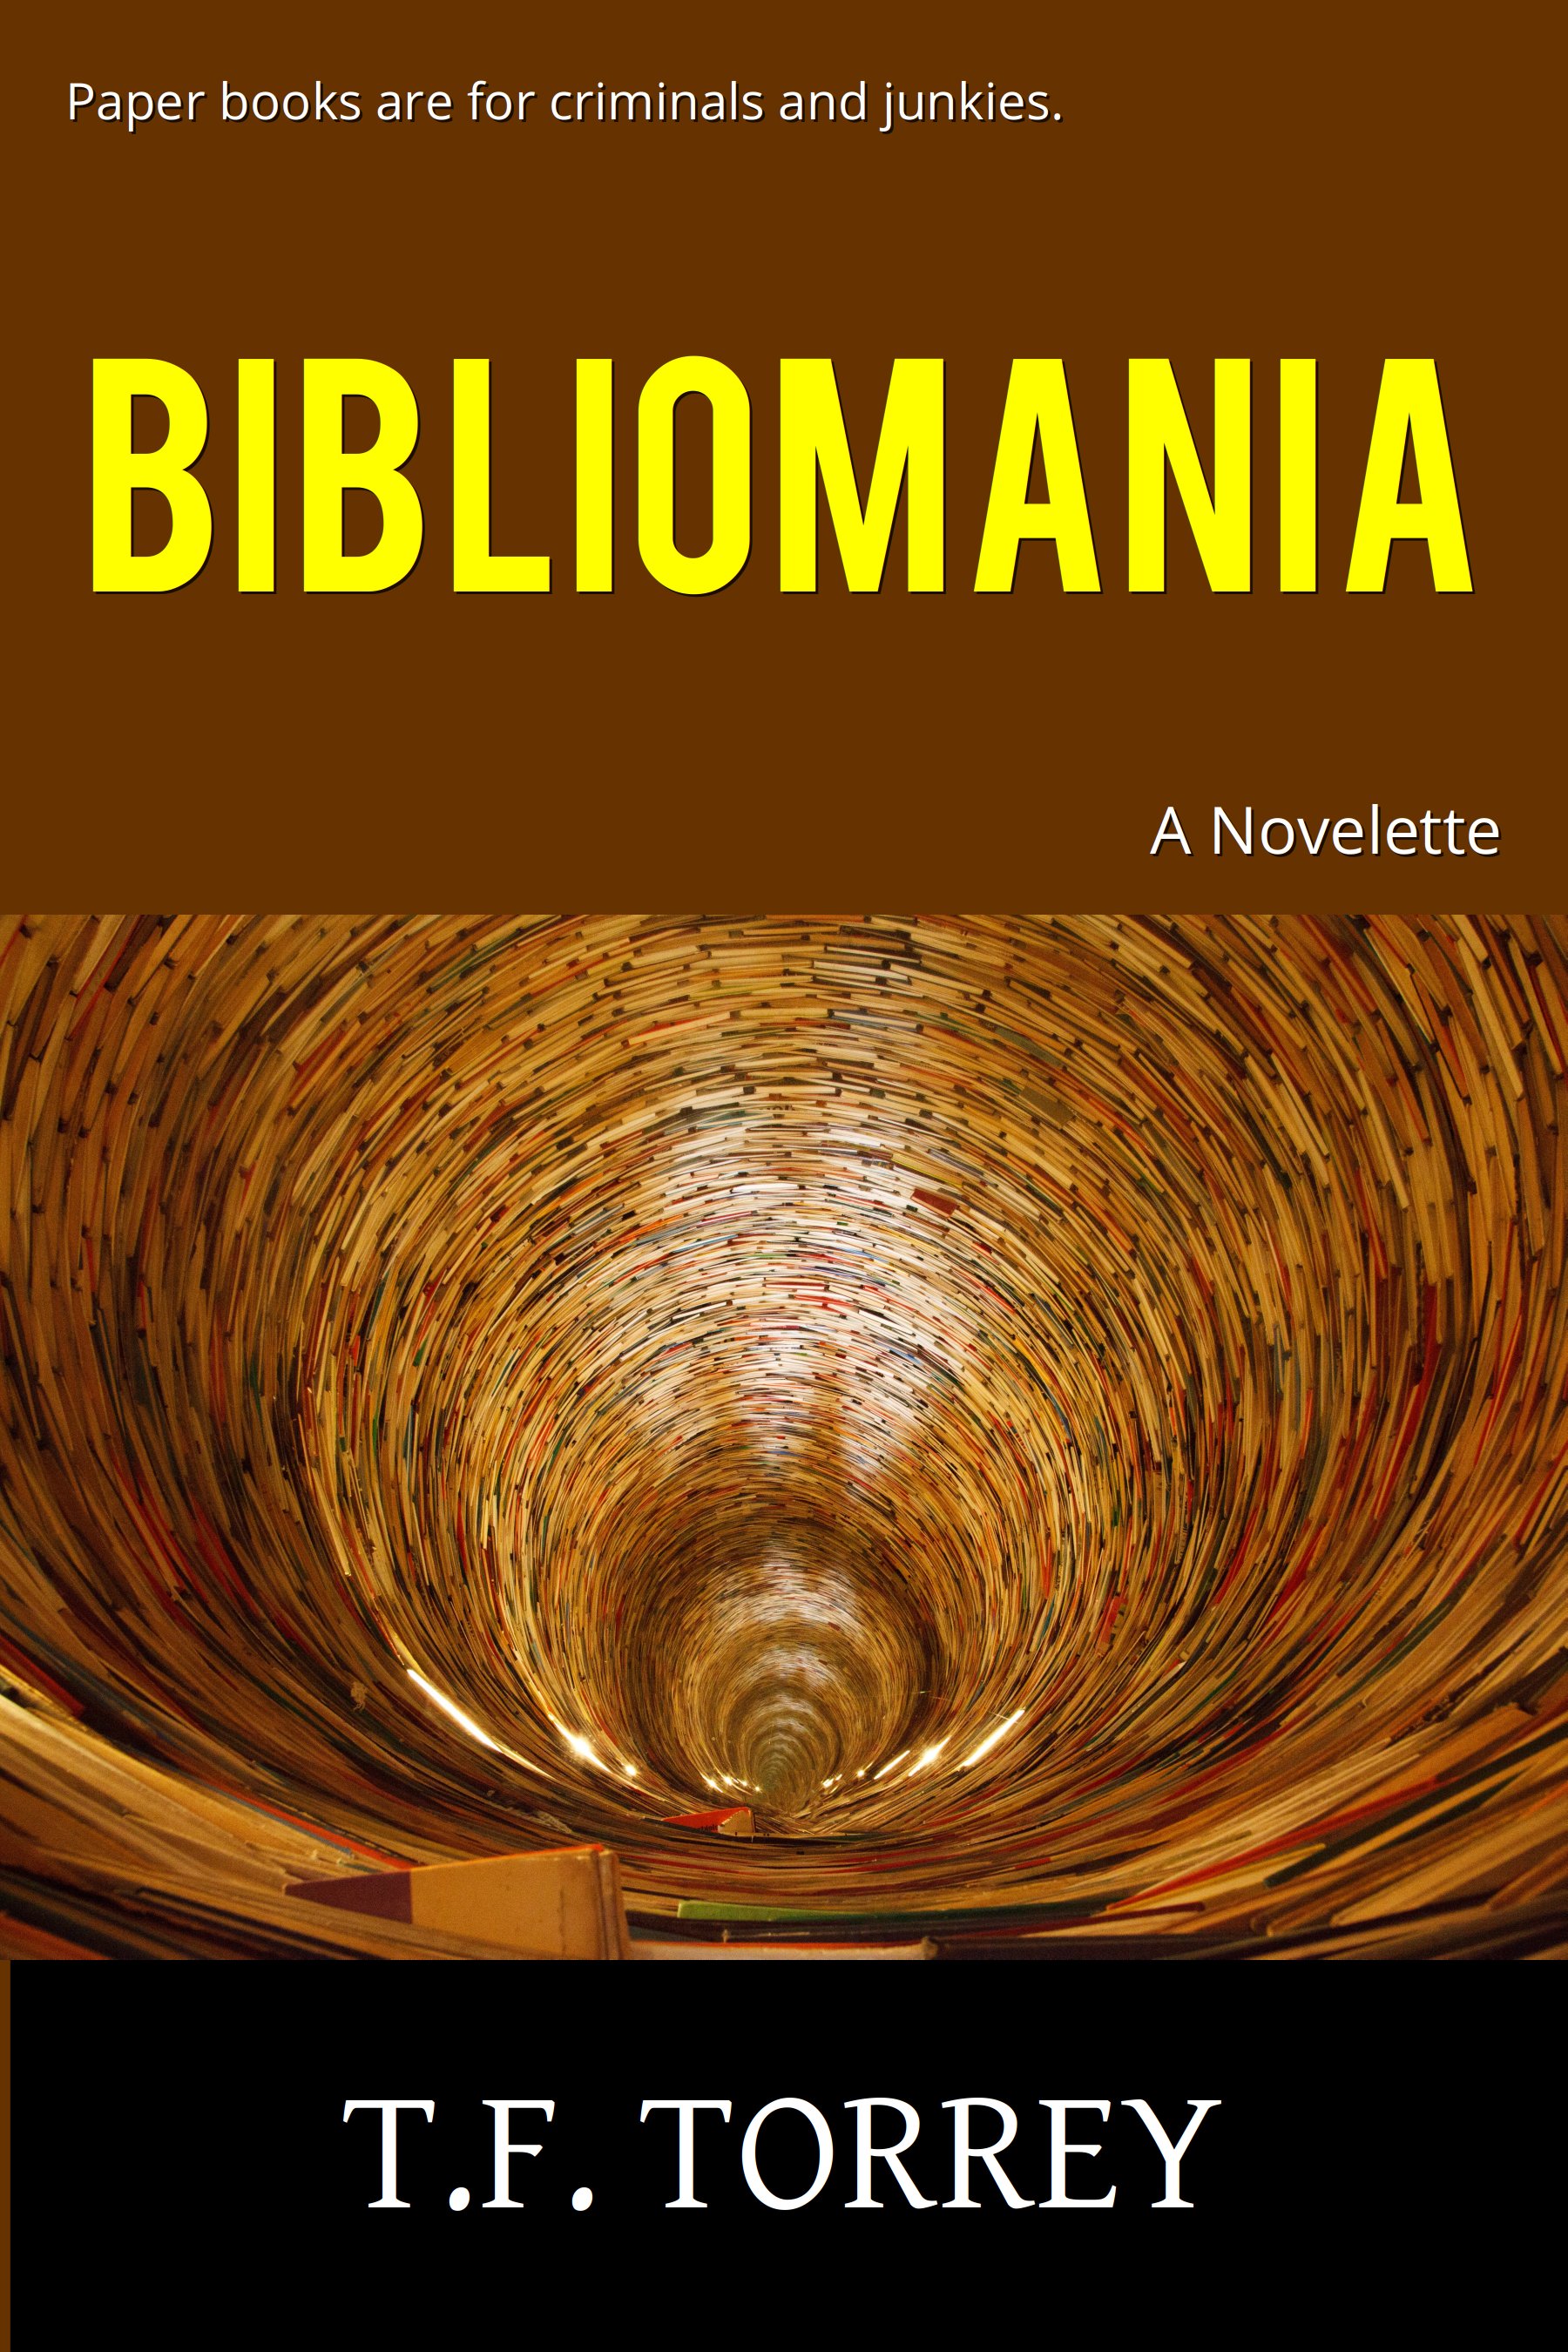 Cover of Bibliomania: A Novelette by T.F. Torrey